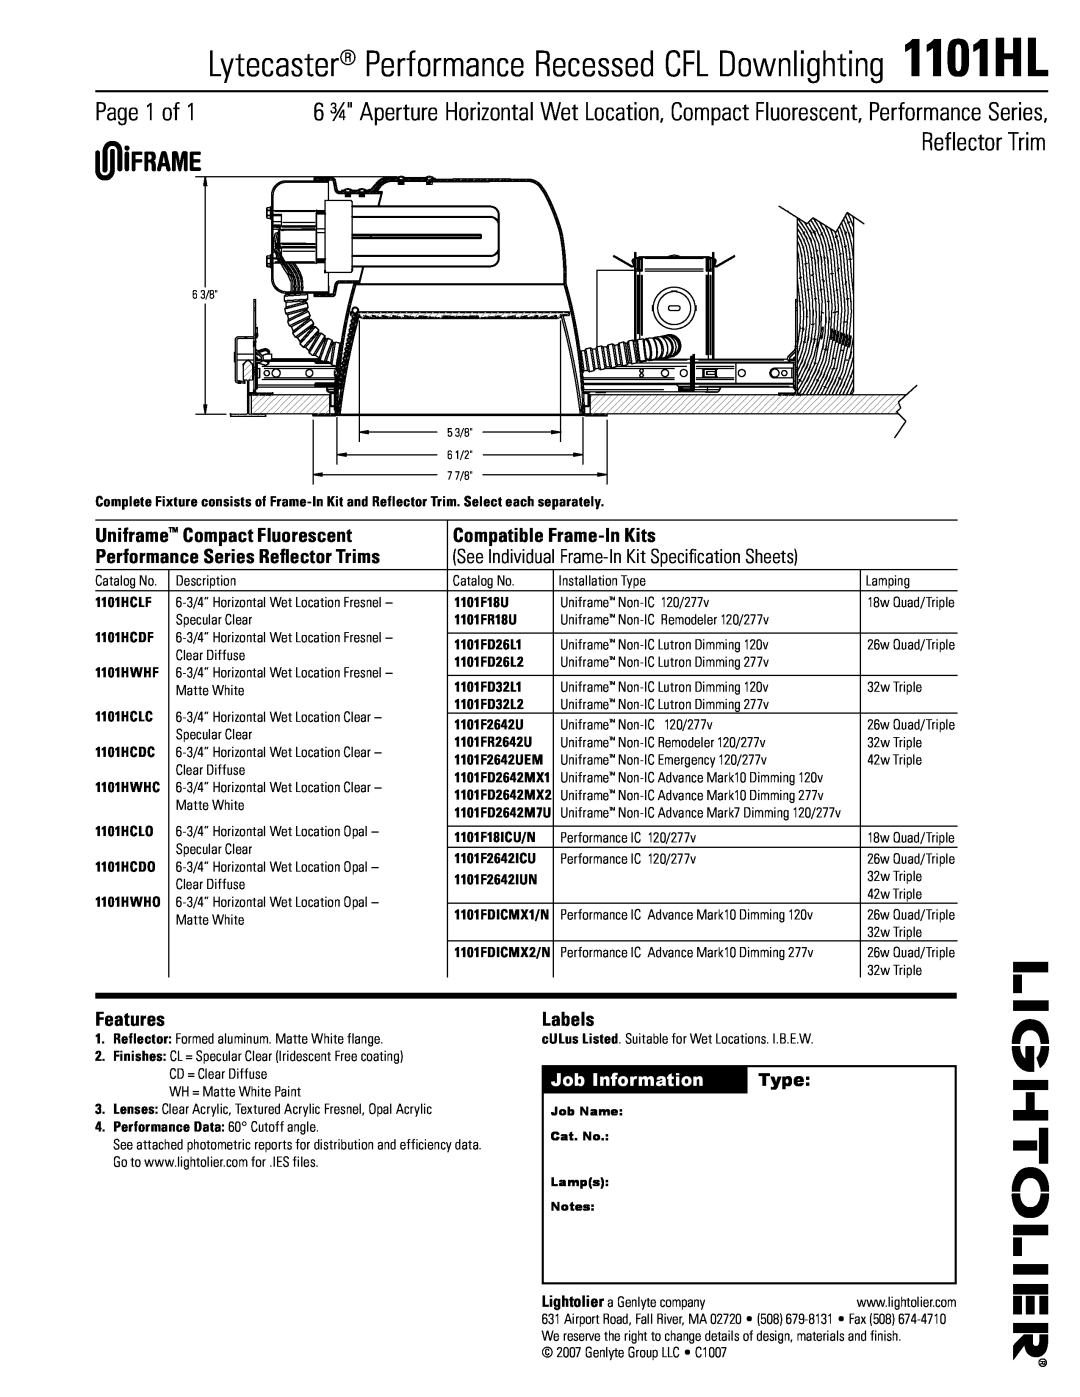 Lightolier 1101HL specifications Page of, Reflector Trim, Job Information, Type, Uniframe Compact Fluorescent, Features 